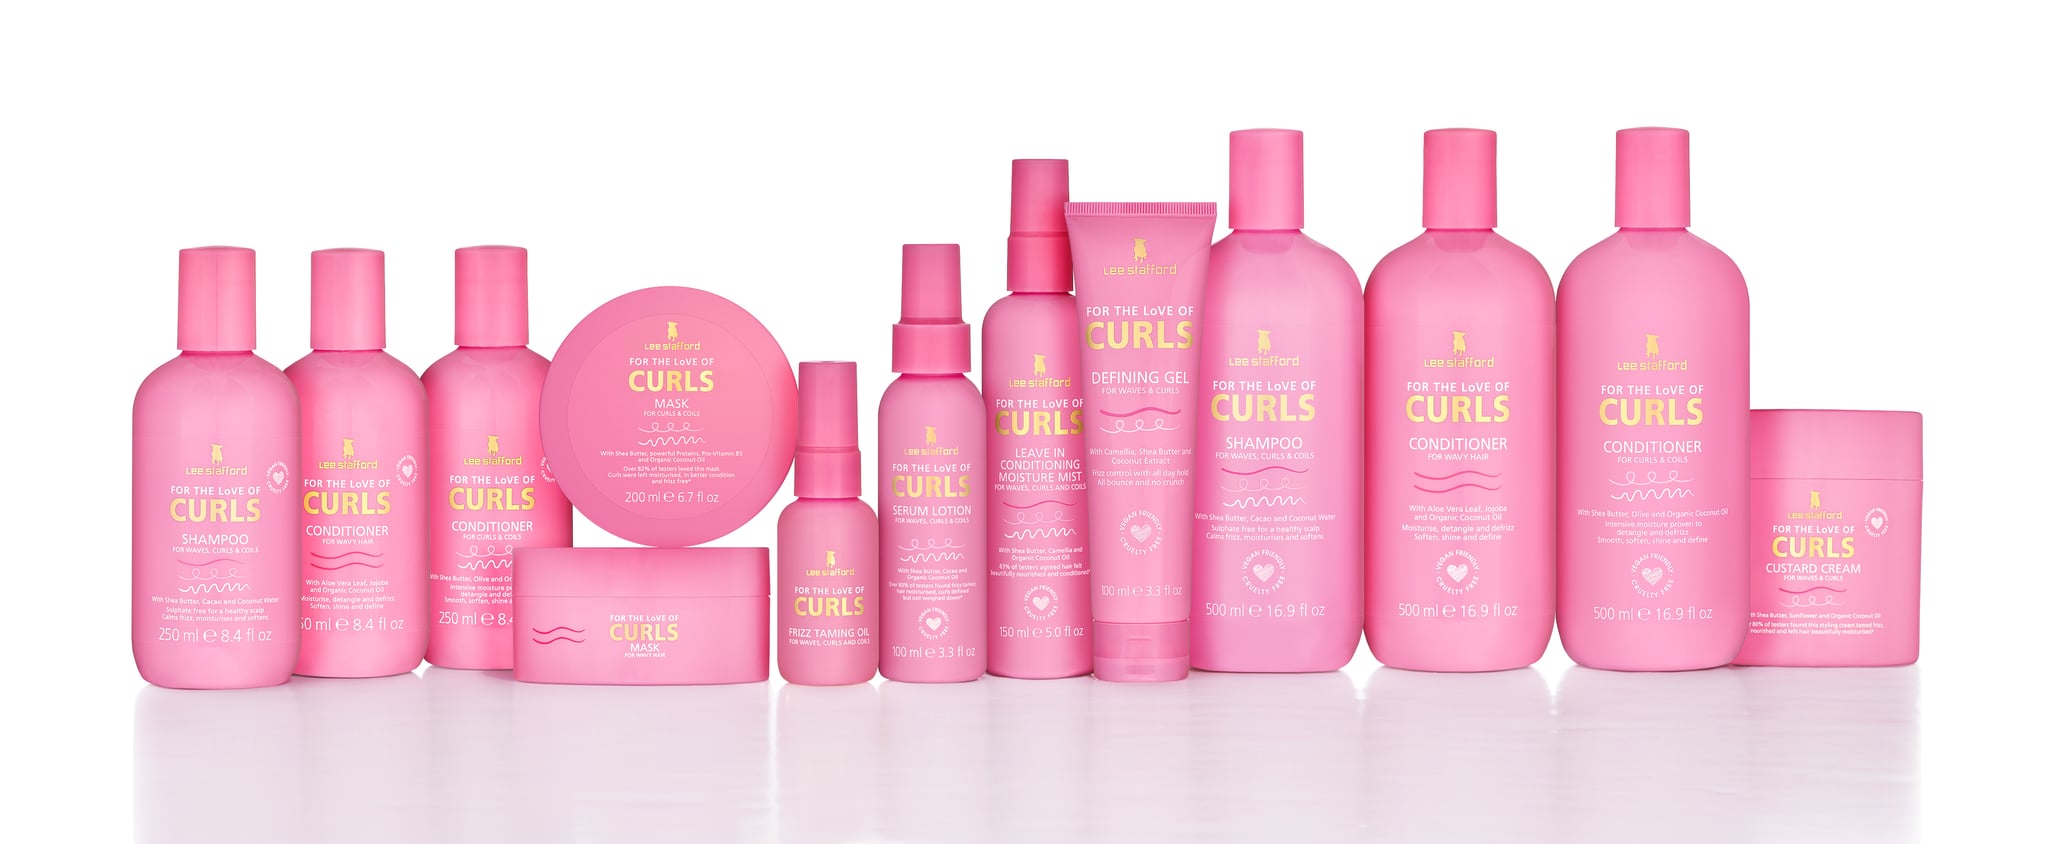 Lee Stafford's For the Love of Curls Review | POPSUGAR Beauty